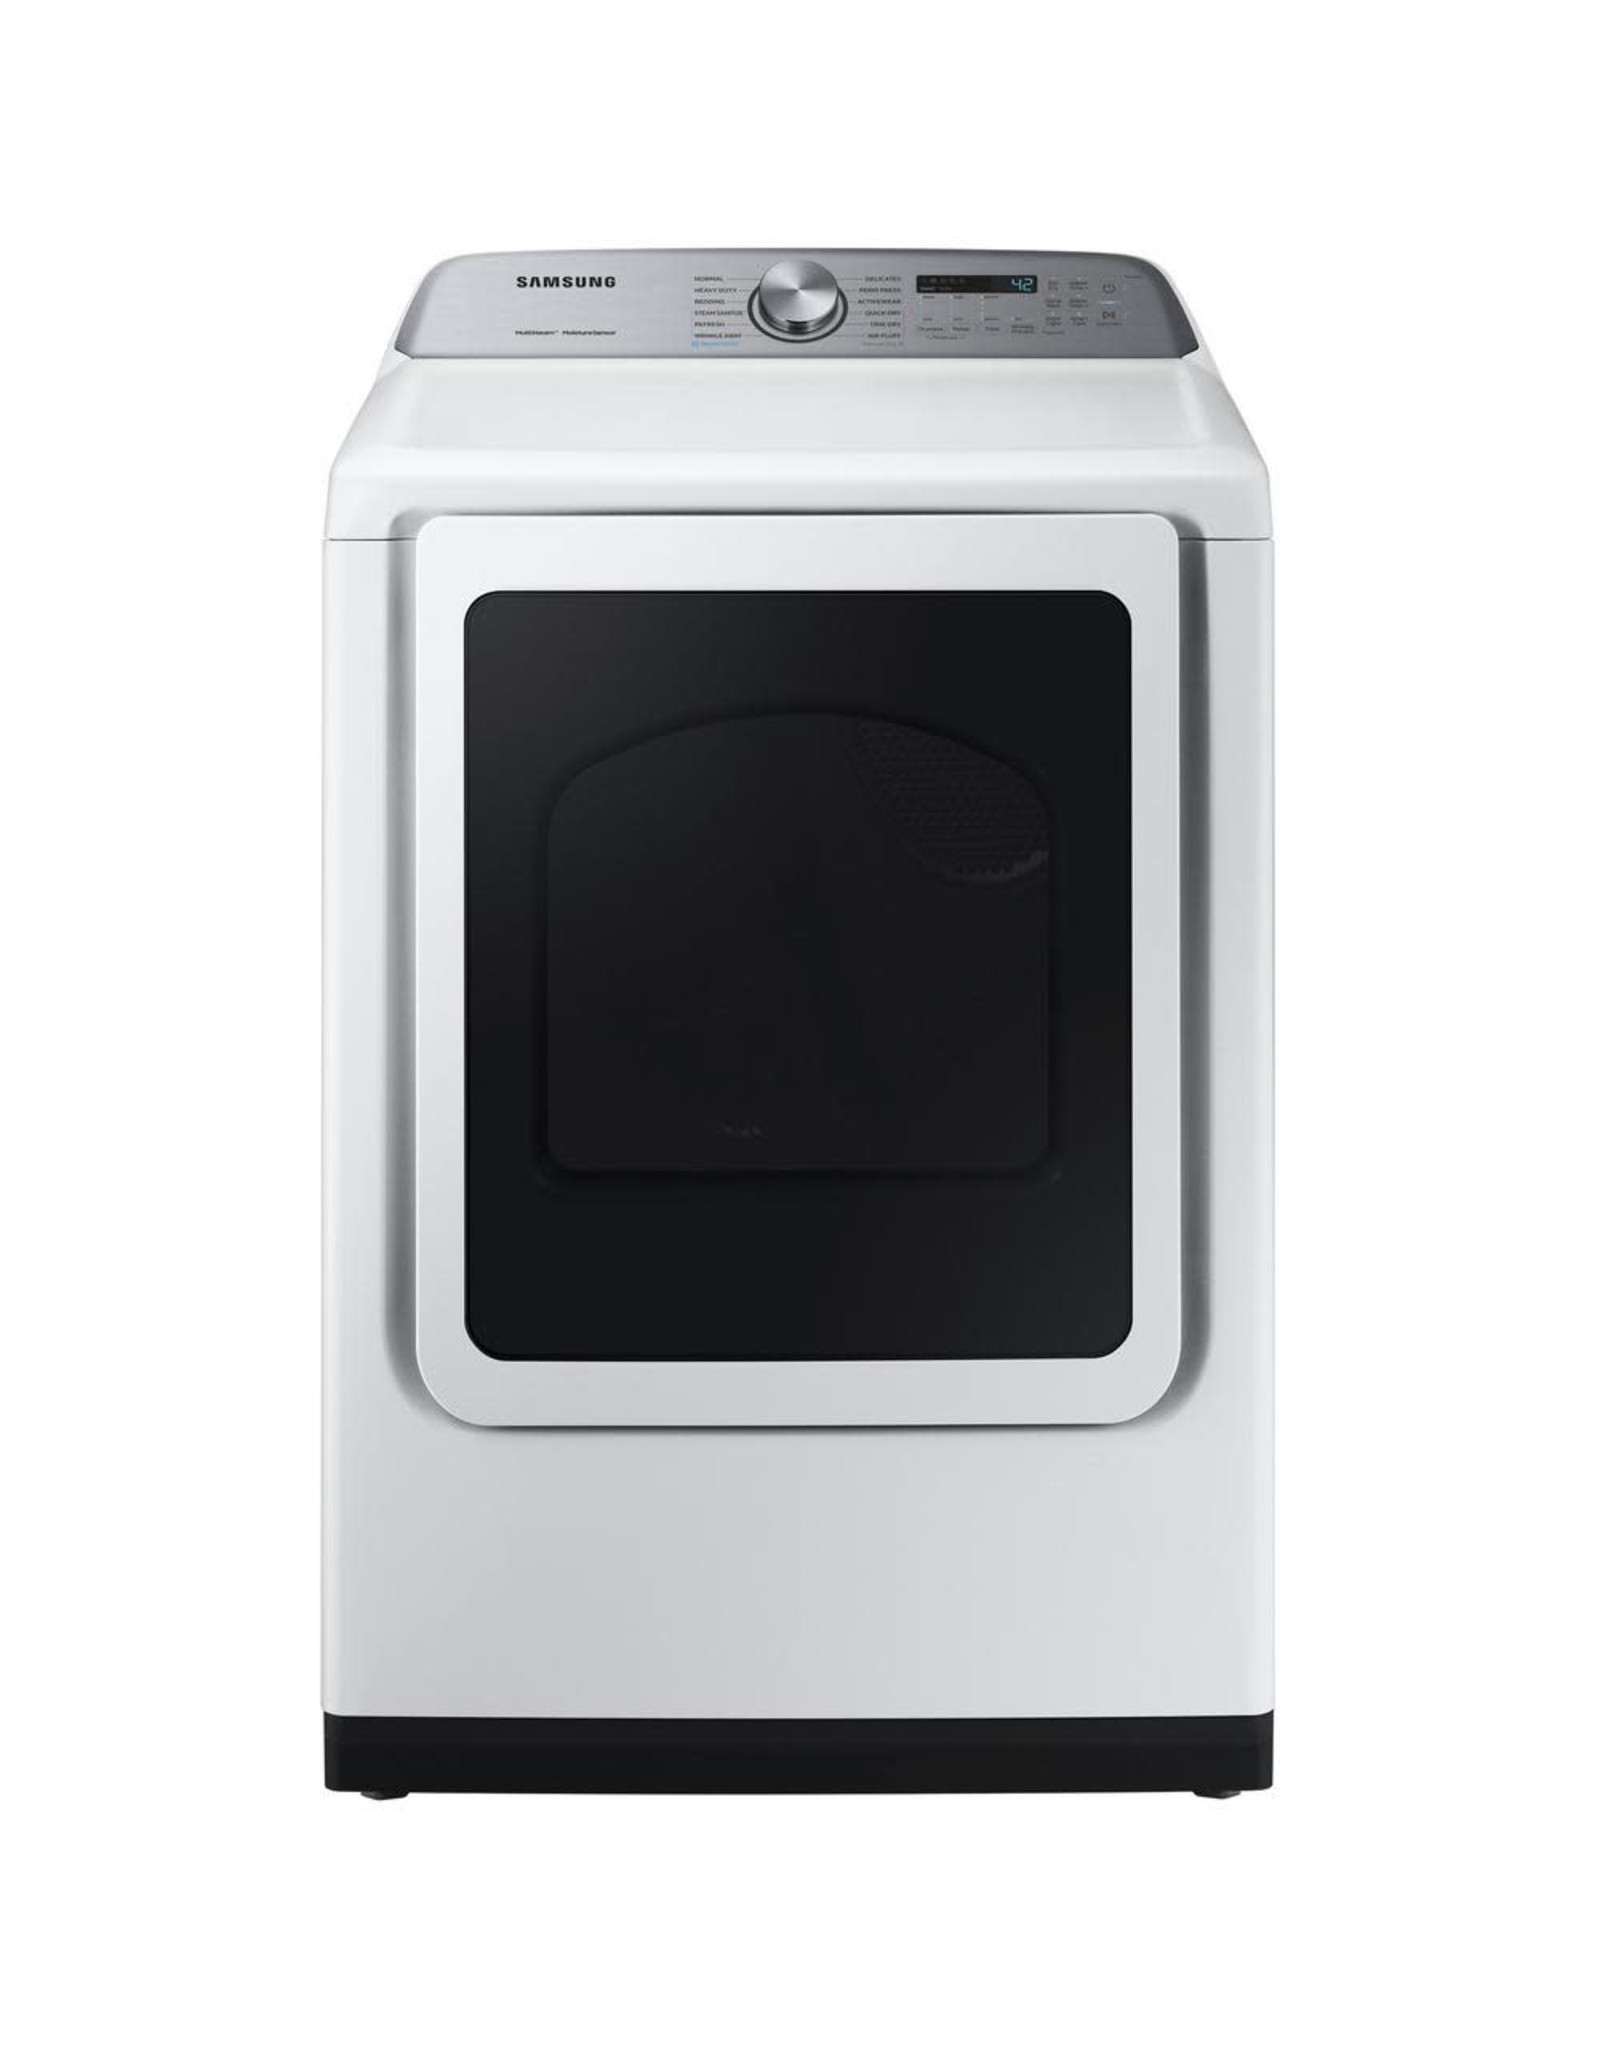 SAMSUNG DVE50R5400W 7.4 cu. ft. White Electric Dryer with Steam Sanitize+